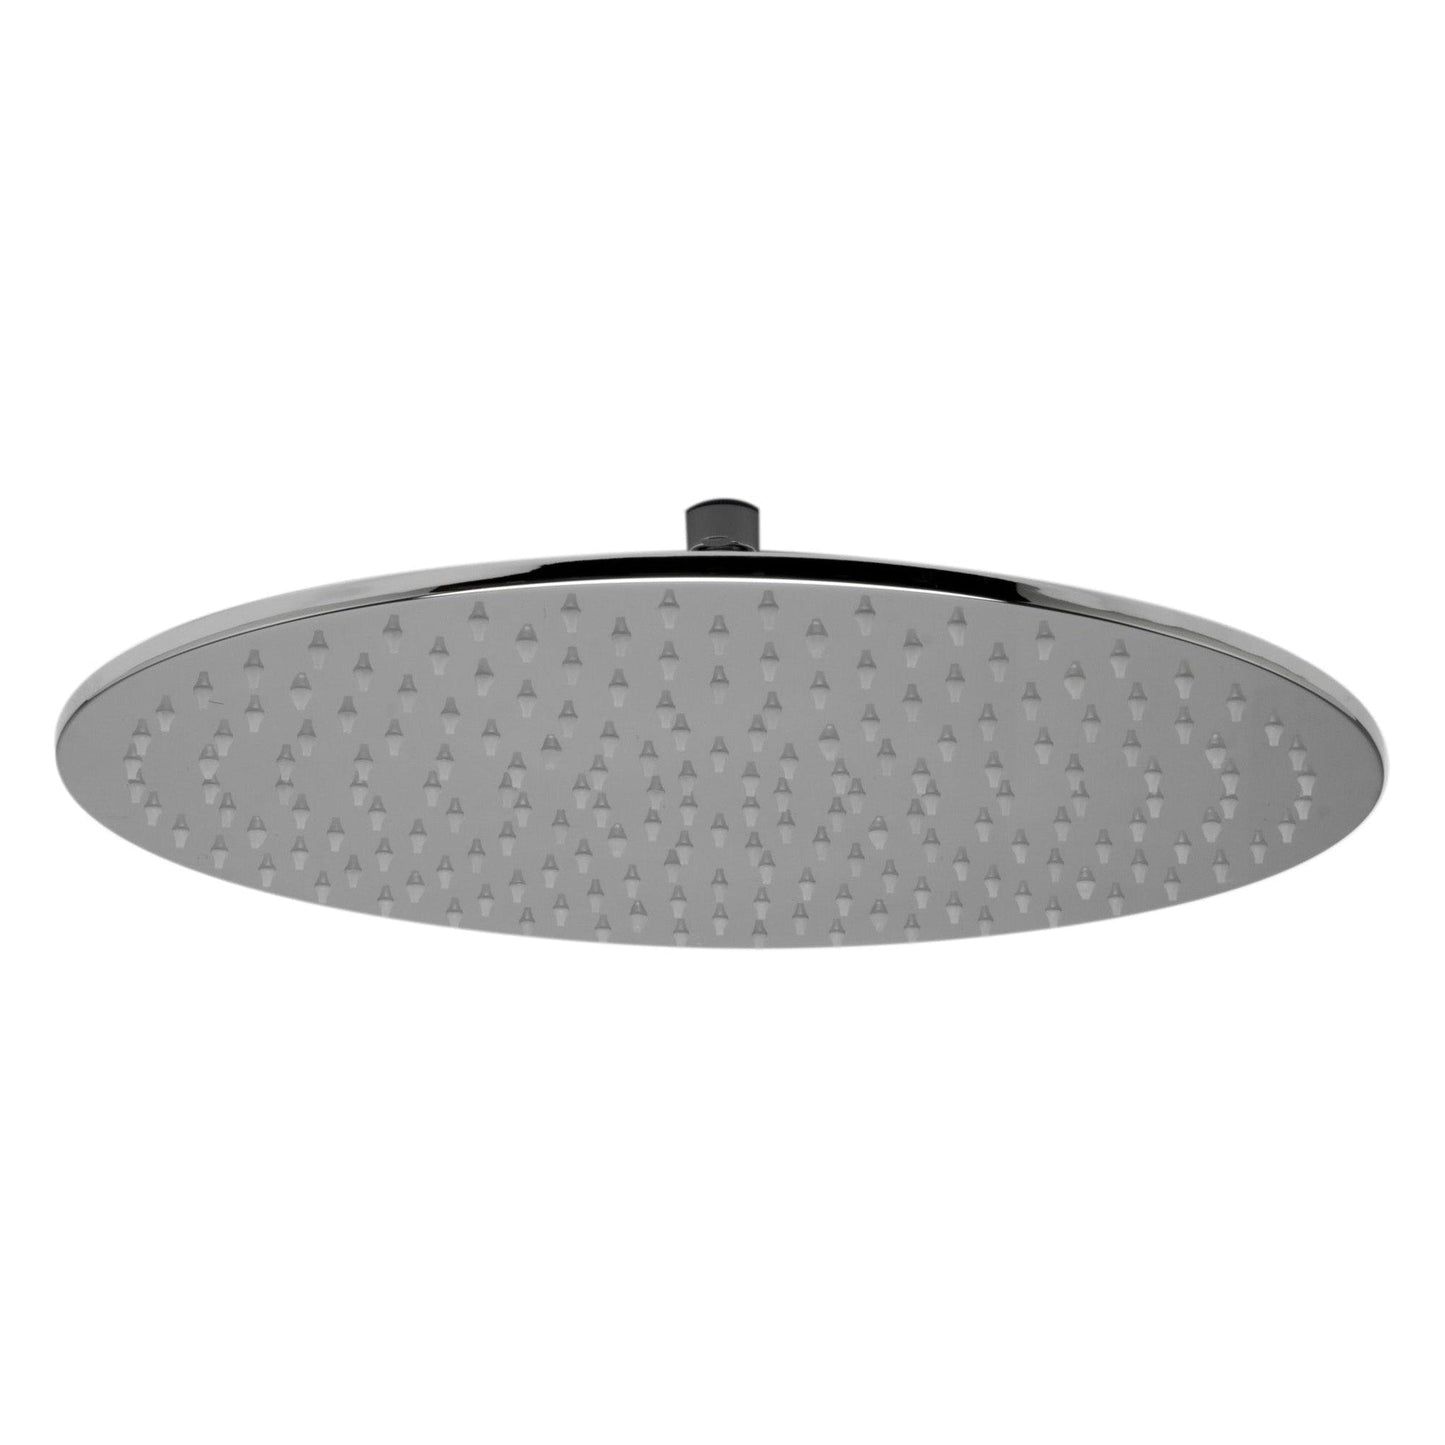 ALFI Brand LED16R-PC 16" Round Polished Chrome Wall or Ceiling Mounted Multi Color LED Rain Brass Shower Head